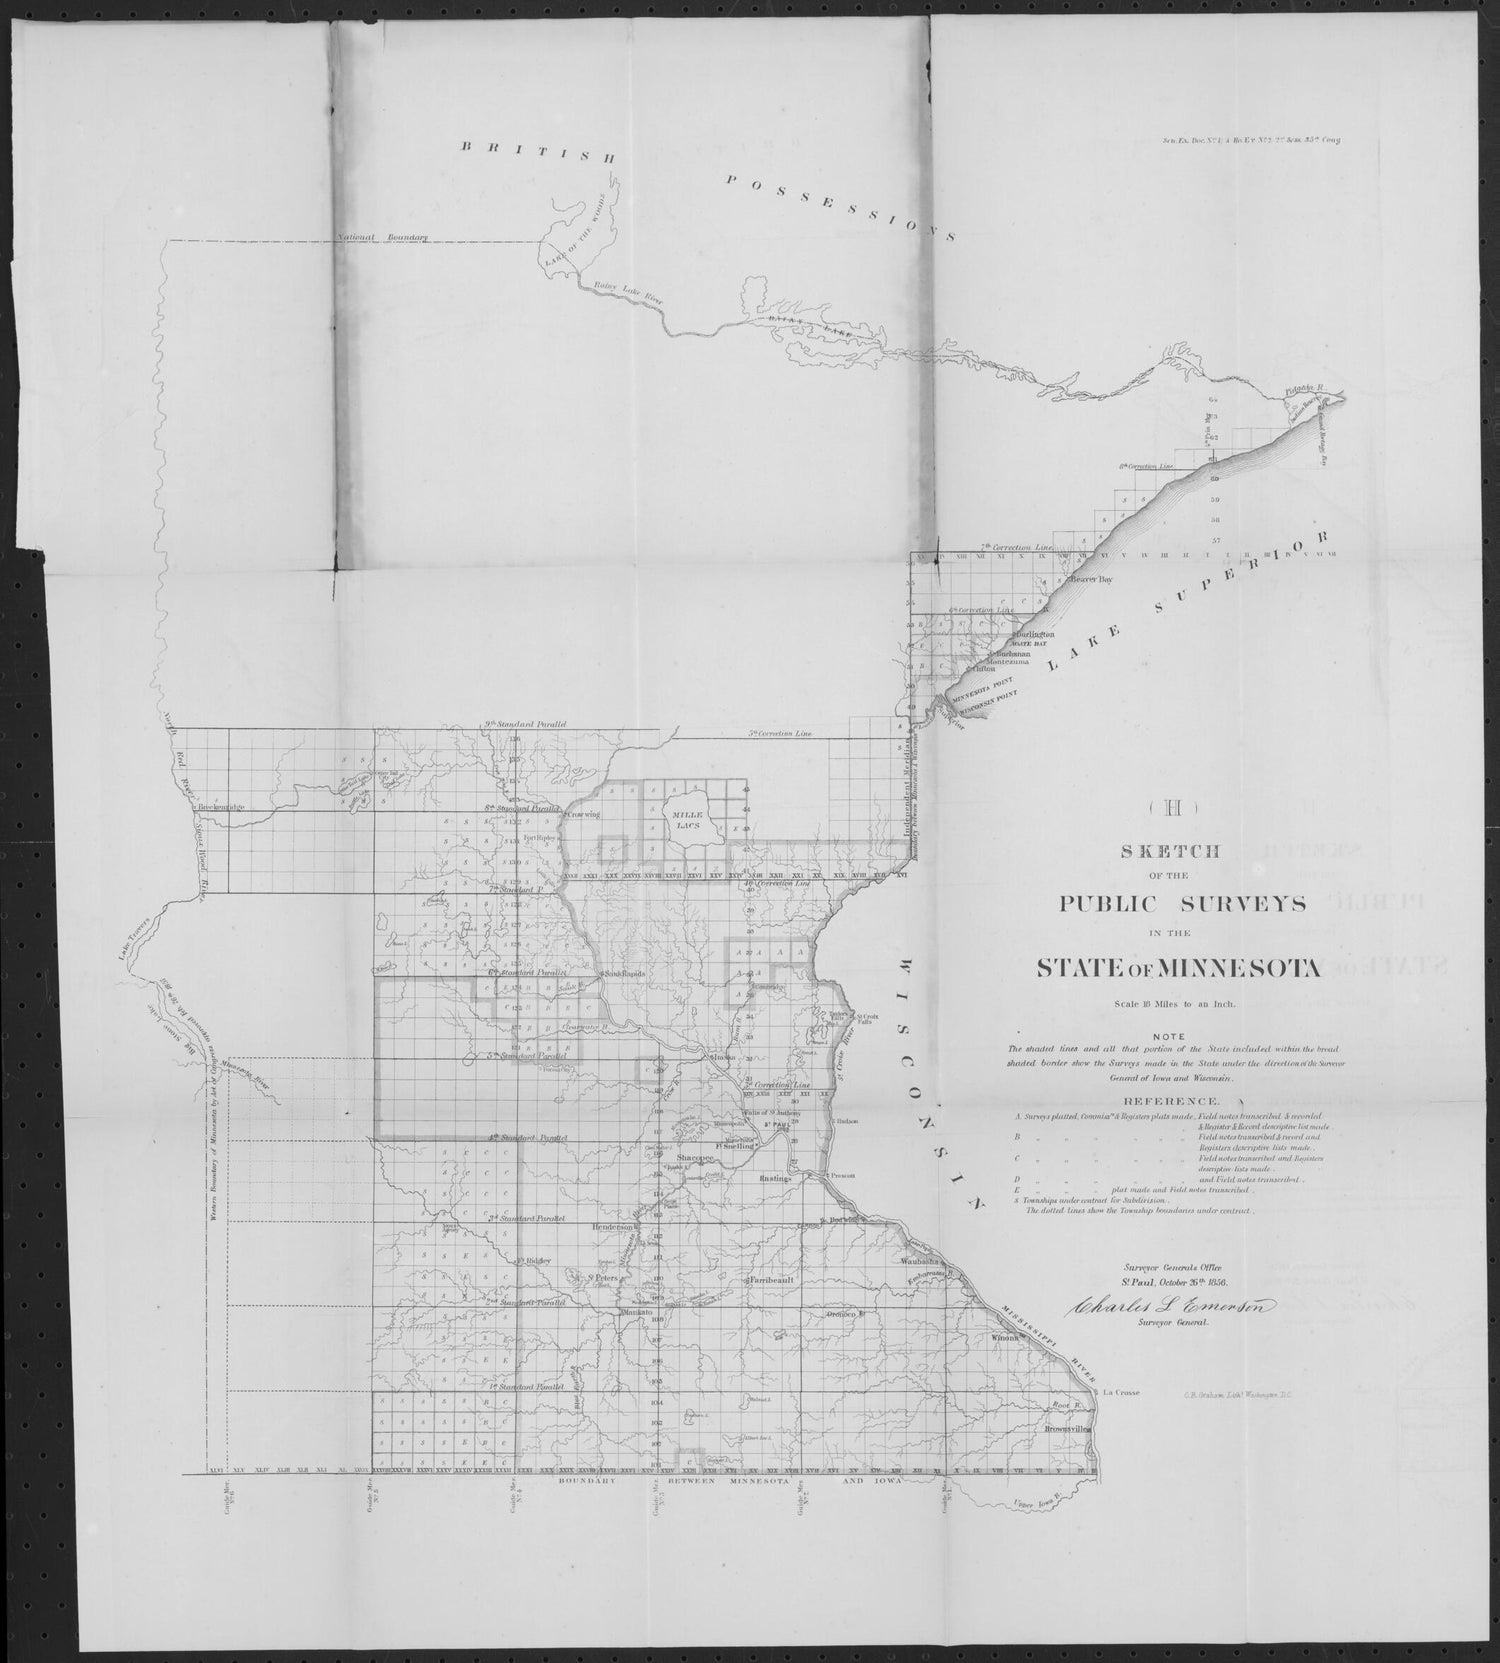 This old map of Sketch of the Public Surveys In the State of Minnesota from 1856 was created by  C.B. Graham&